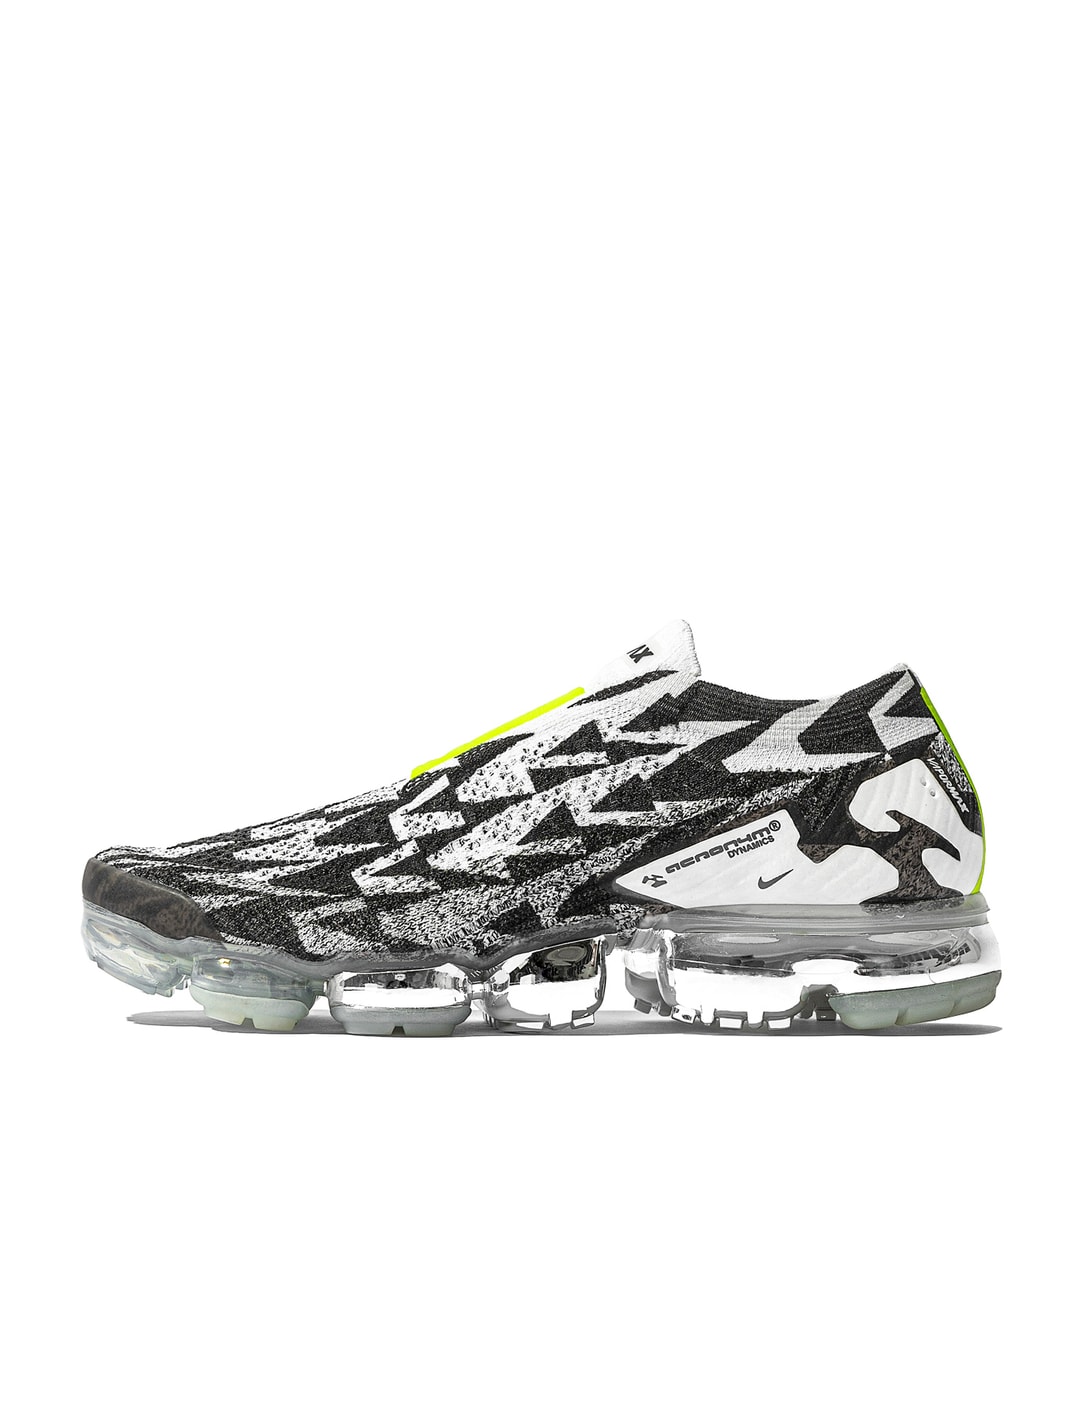 ACRONYM - ACRONYM x Nike VaporMax F&F Chrome | HBX - Globally Curated Fashion and Lifestyle by Hypebeast